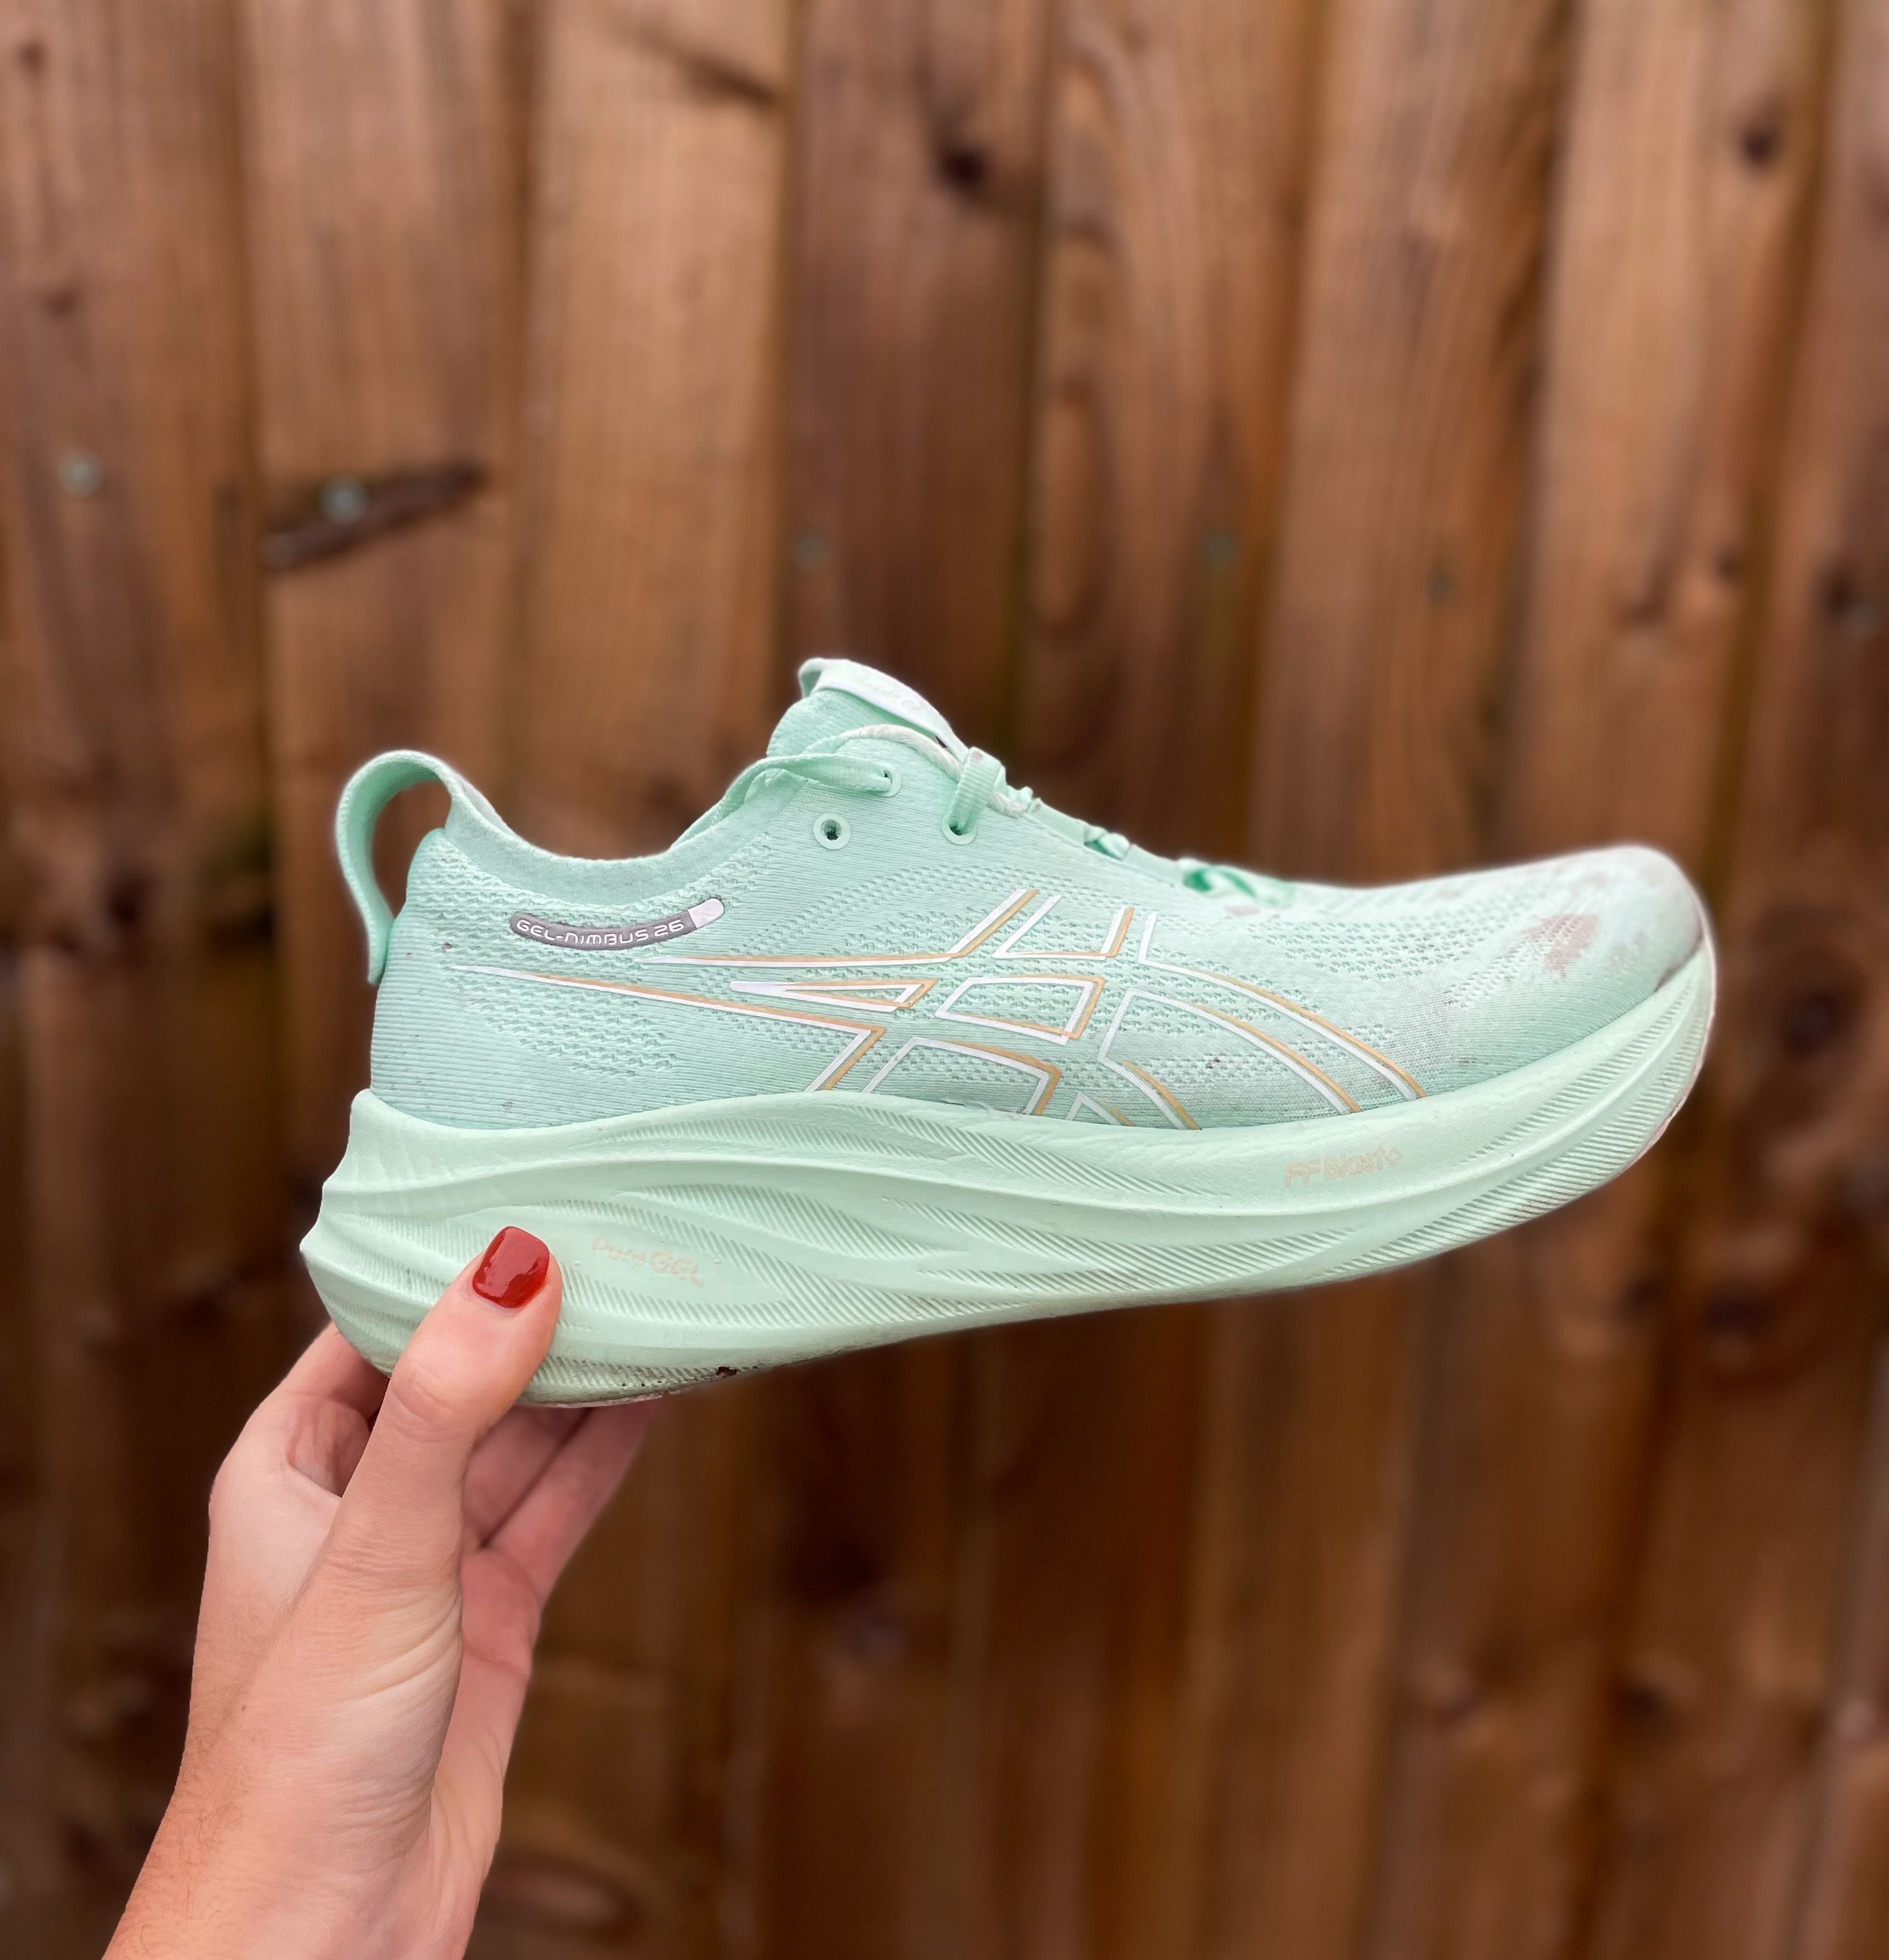 Asics Gel-Nimbus 26: Tried and tested